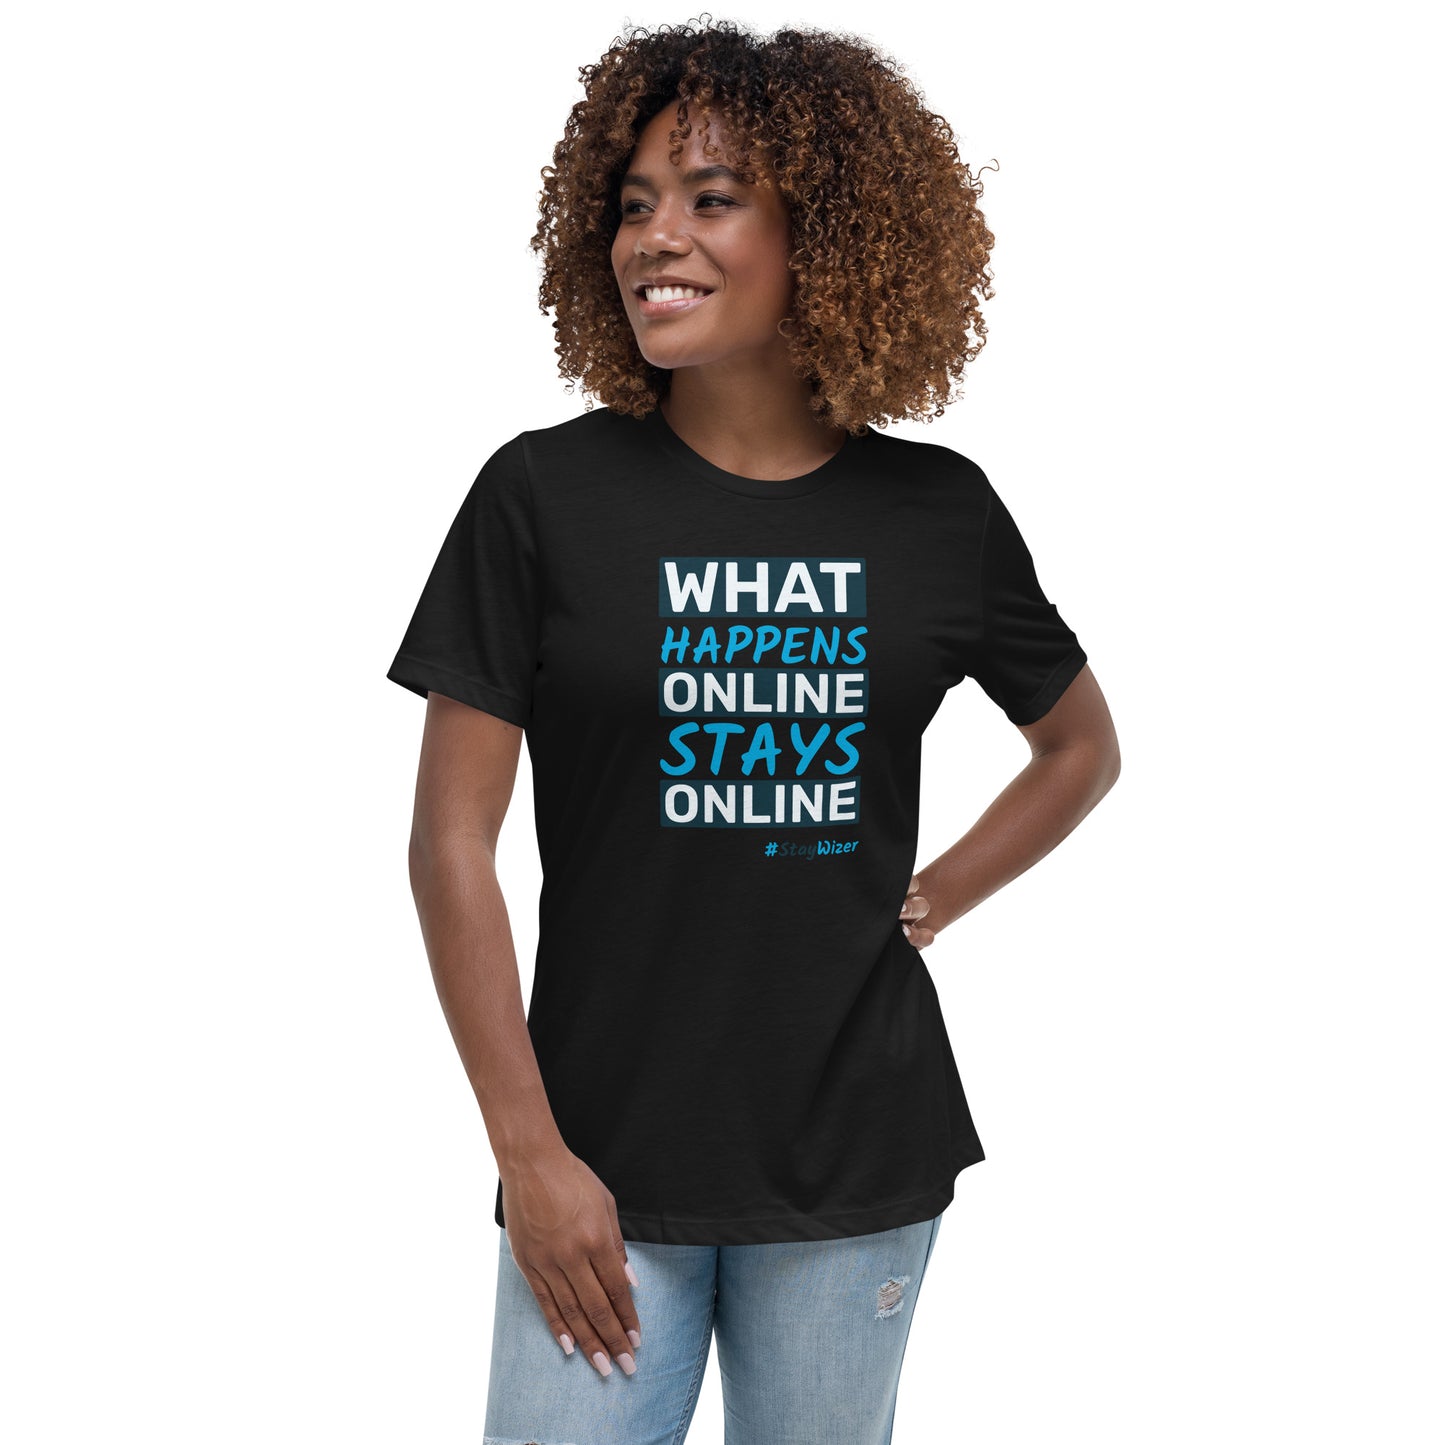 What Happens Online, Stays Online - Women's Relaxed T-Shirt